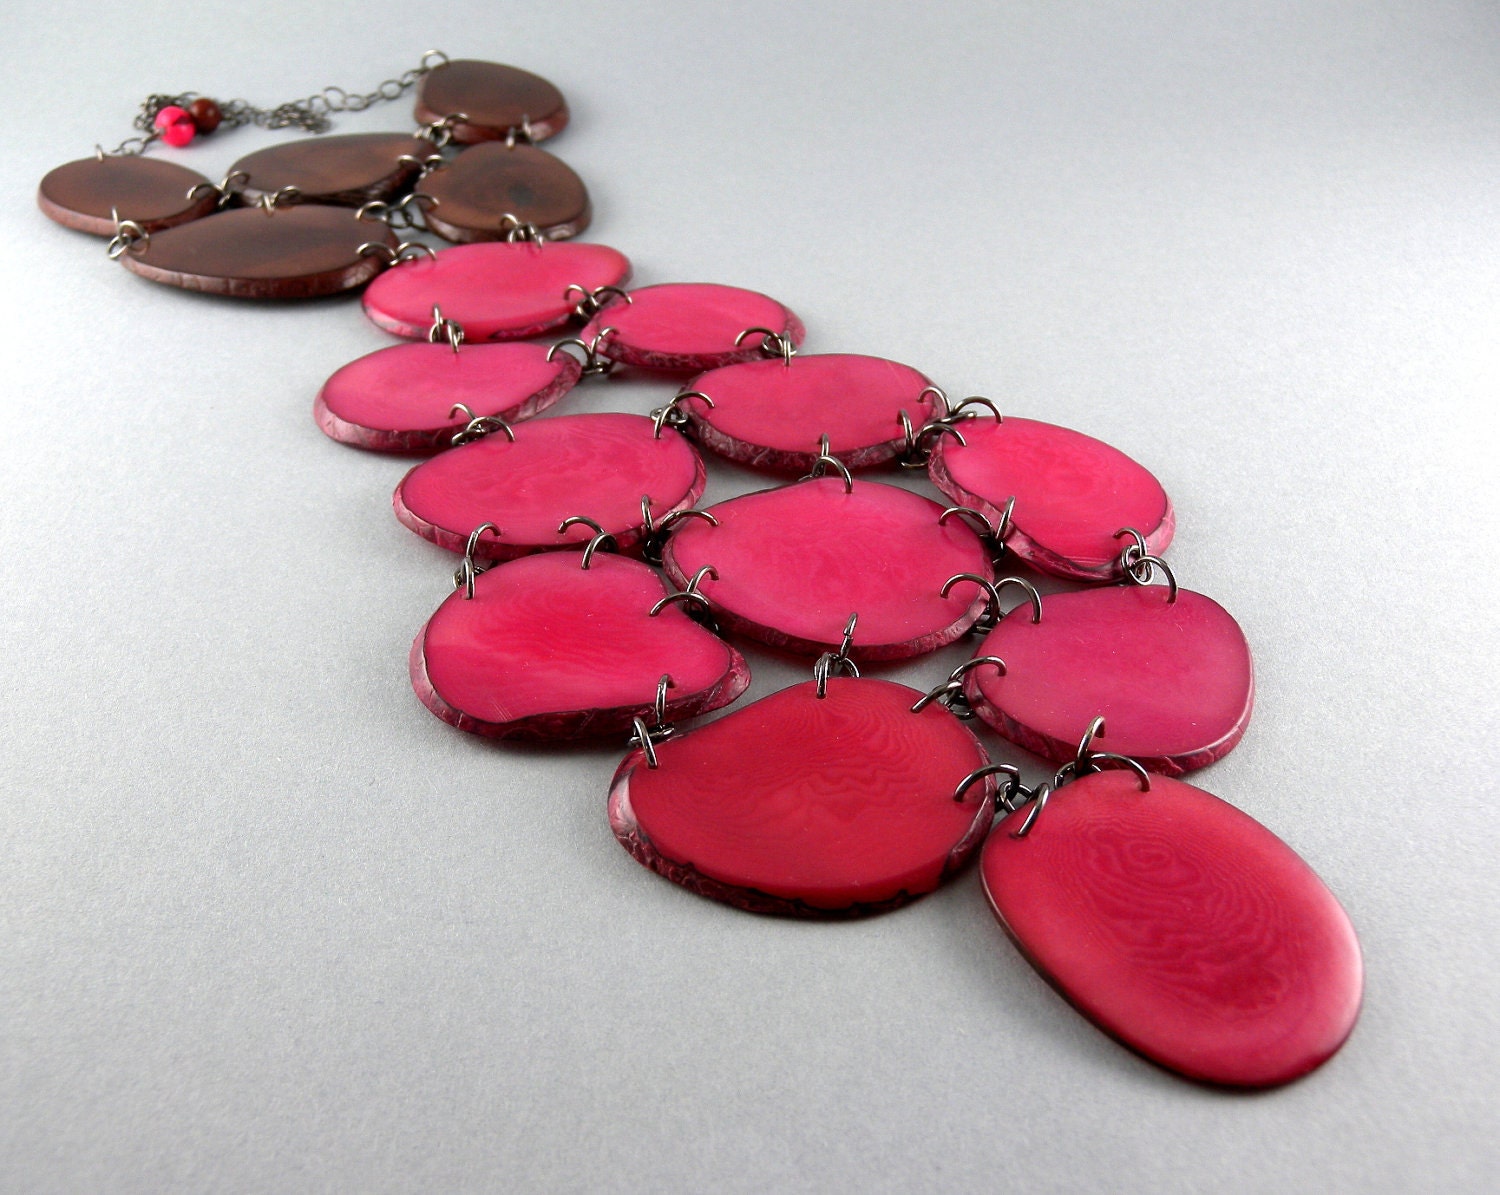 Chocolate Cherry Eco Friendly Tagua Nut Tie Necklace with Free Shipping "The Office" - decoratethediva